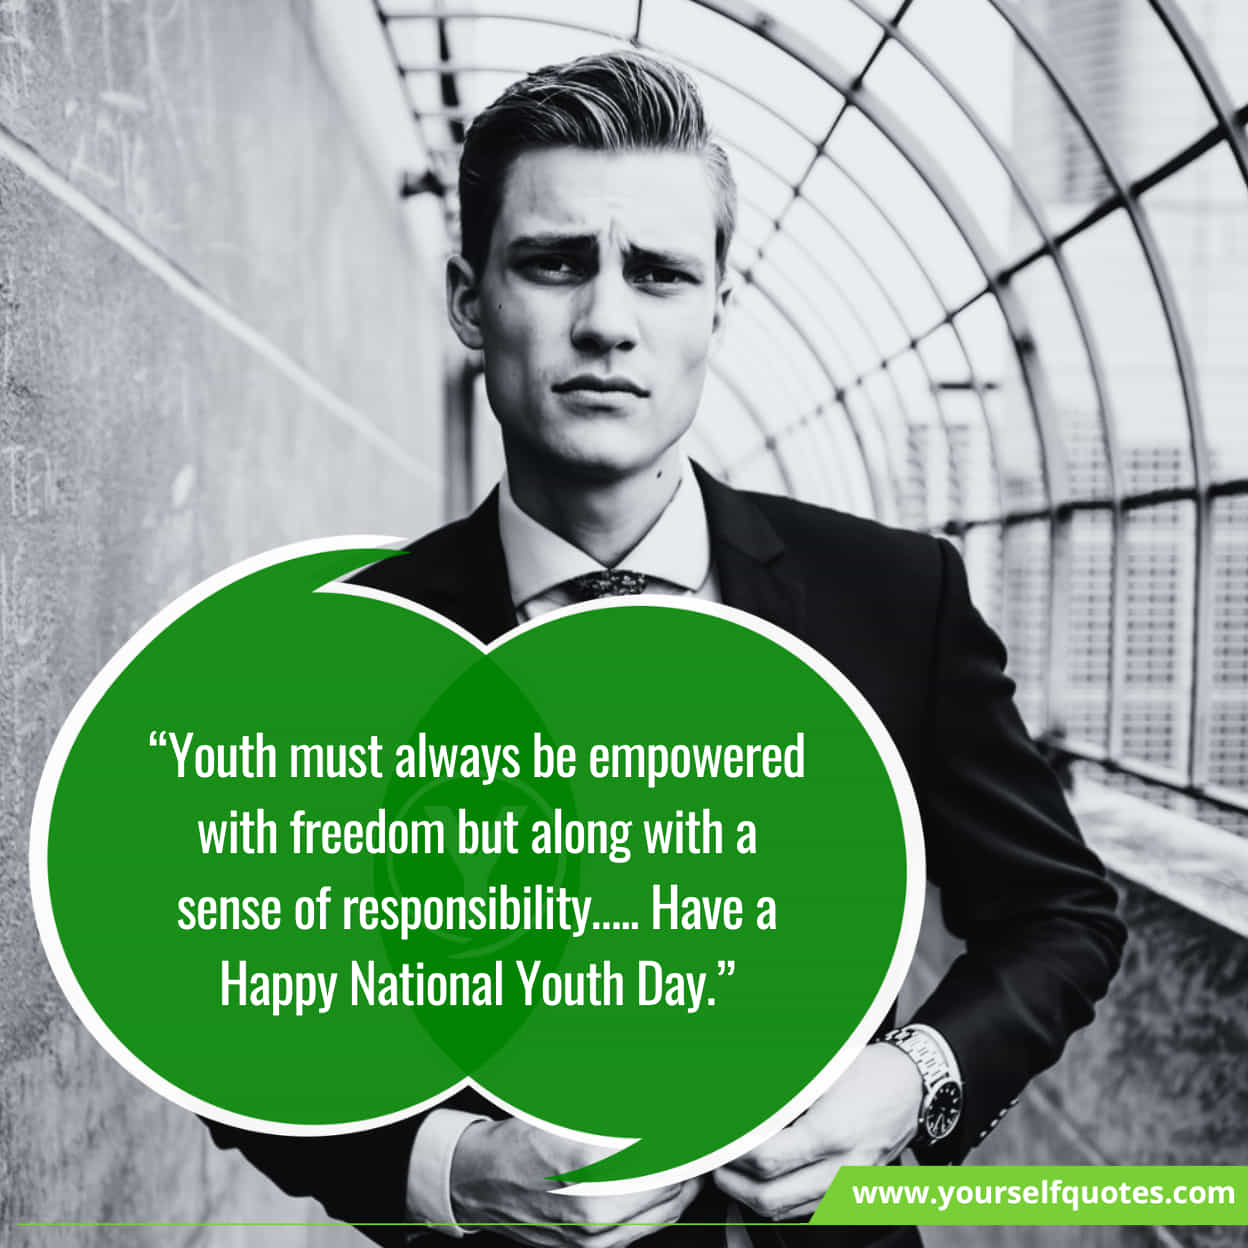 National Youth Day Messages & Slogans